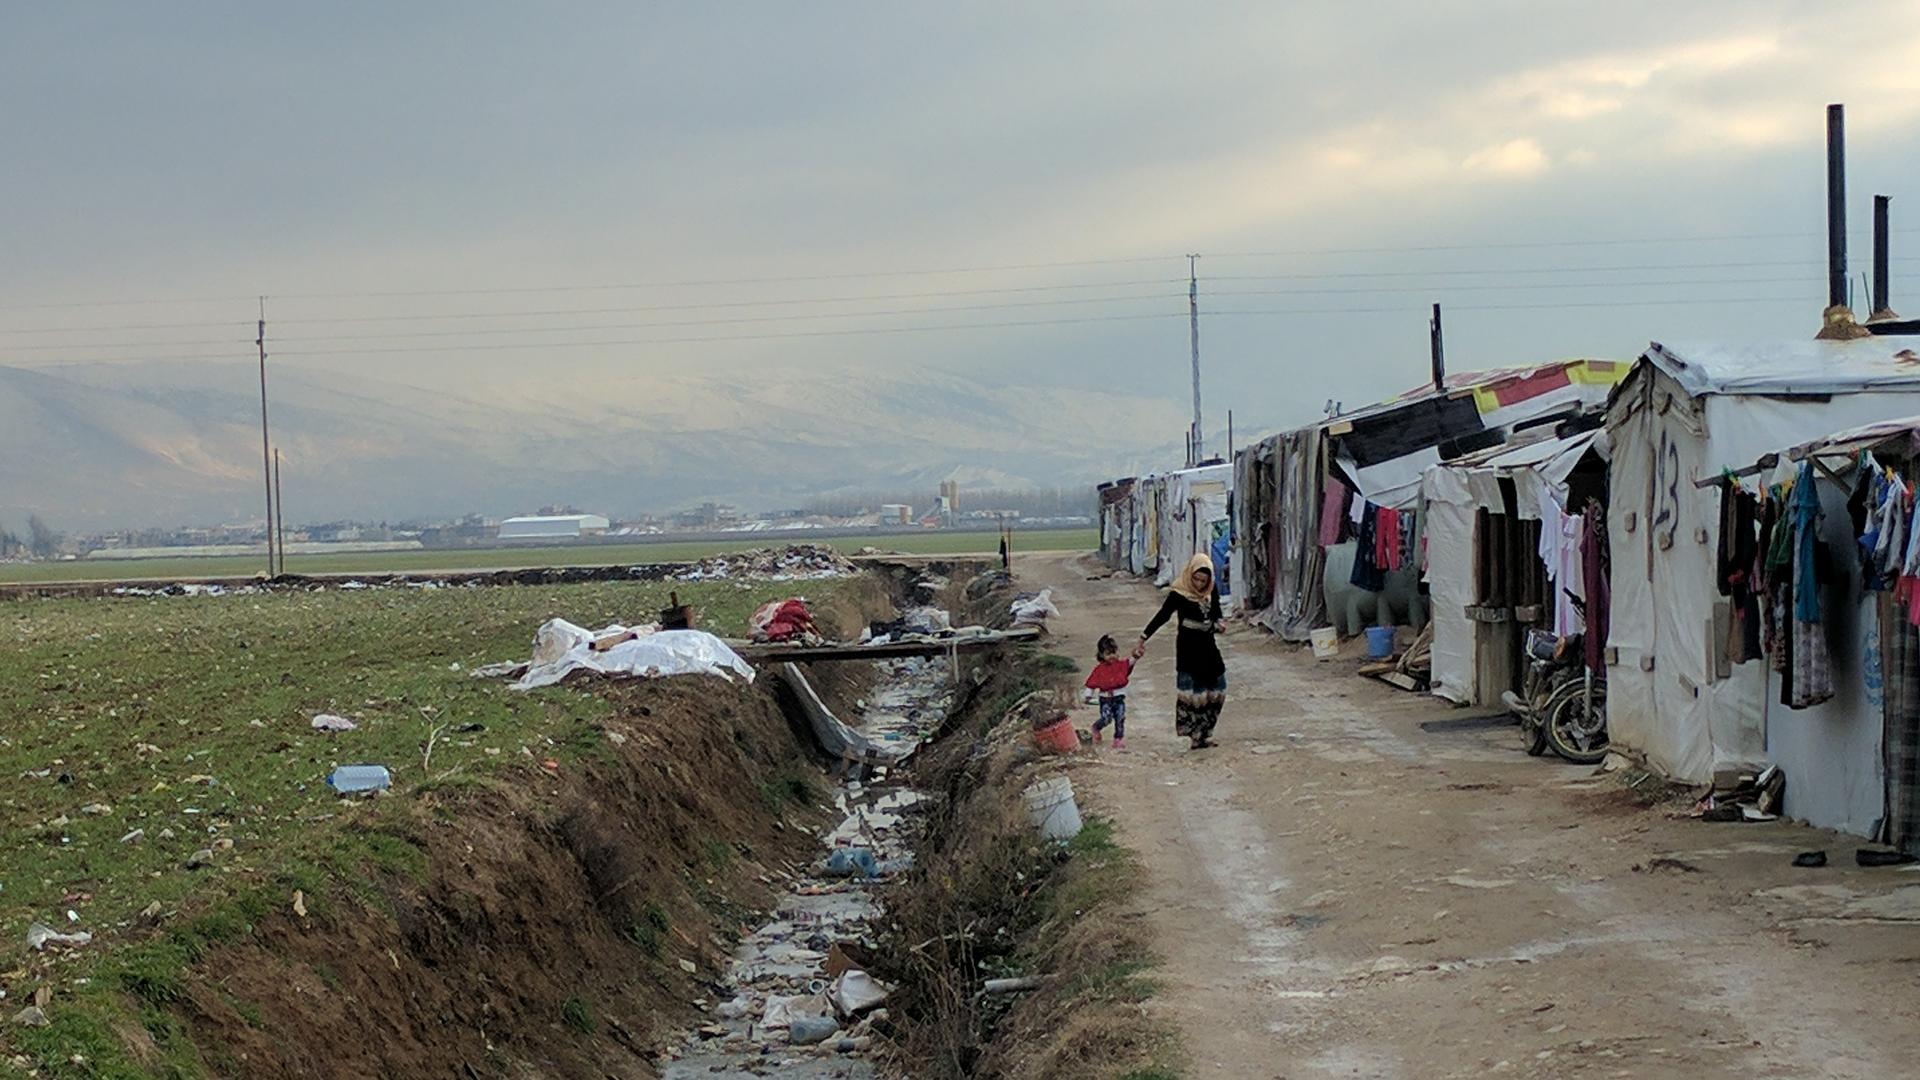 A settlement for Syrian refugees in the Bekaa Valley, Lebanon.